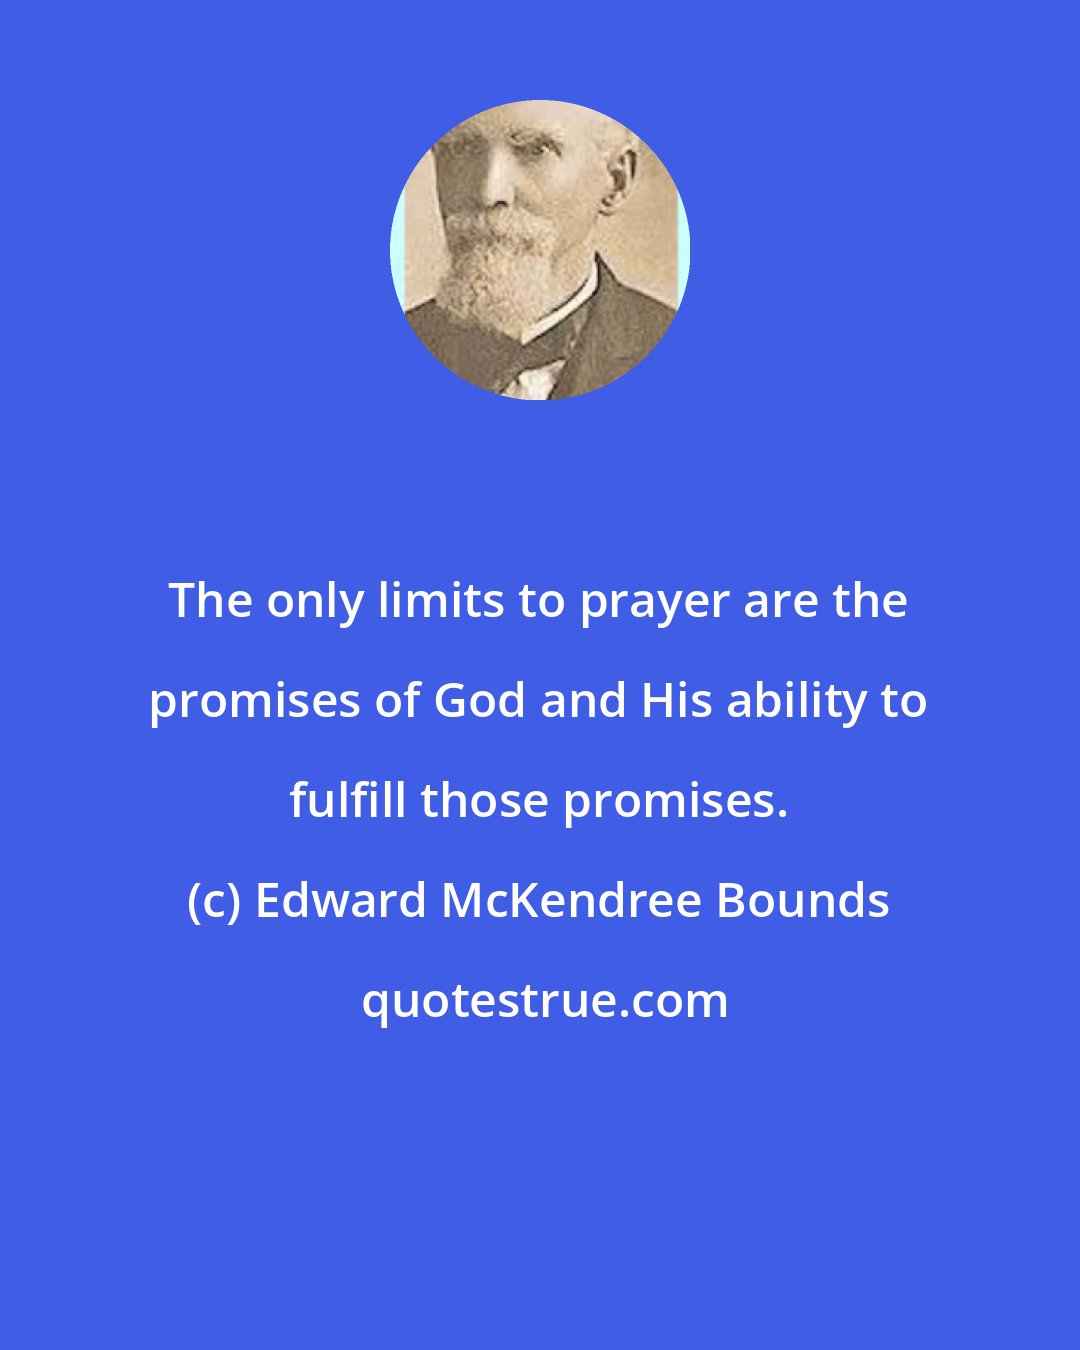 Edward McKendree Bounds: The only limits to prayer are the promises of God and His ability to fulfill those promises.